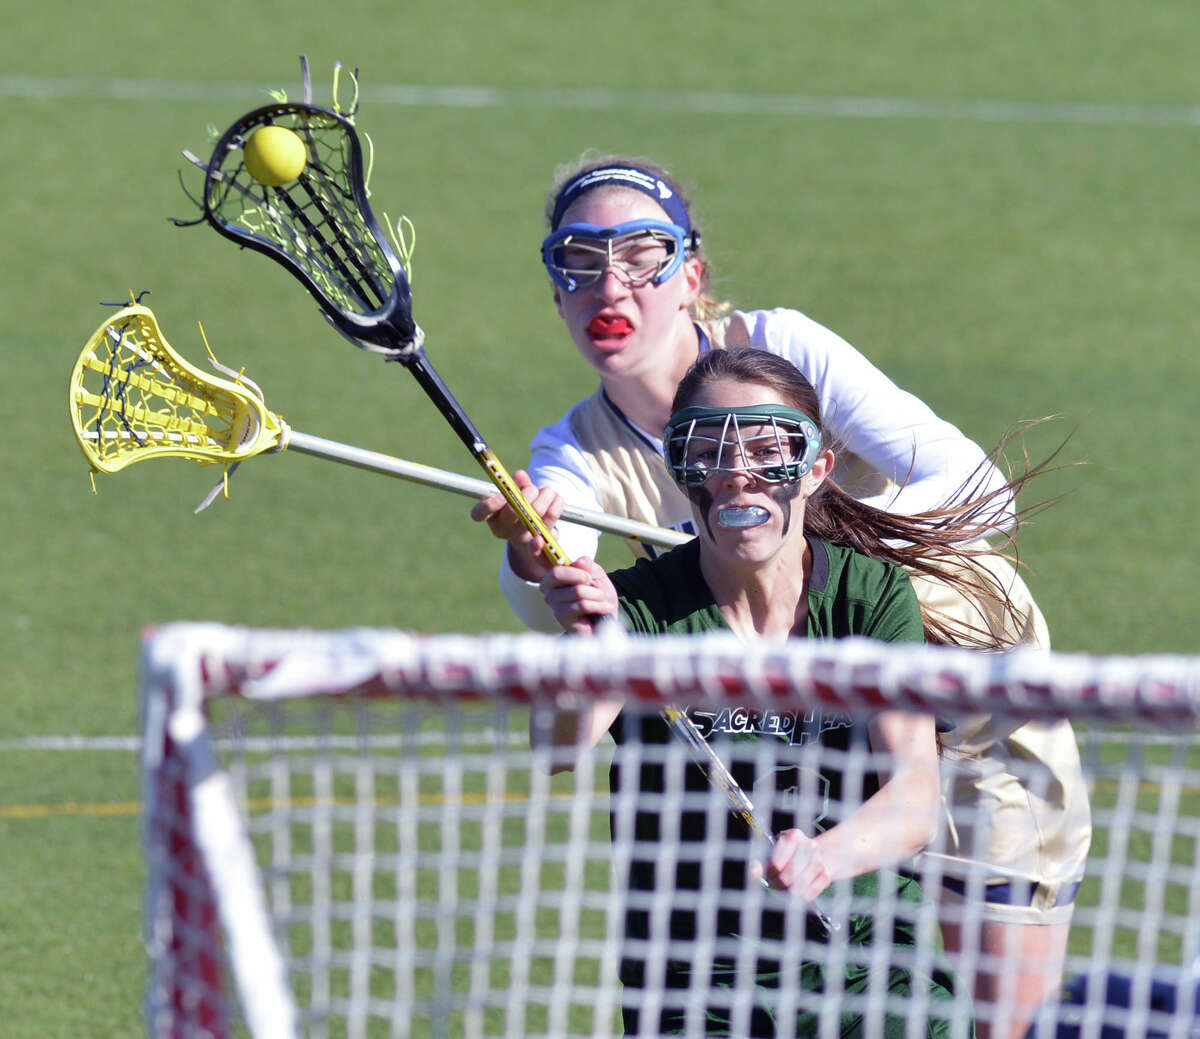 Convent of the Sacred Heart's Charlotte Jeffrey (#8) shoots during the high school lacrosse match between Convent of the Sacred Heart and Choate at Convent in Greenwich, Wednesday, April 16, 2014.